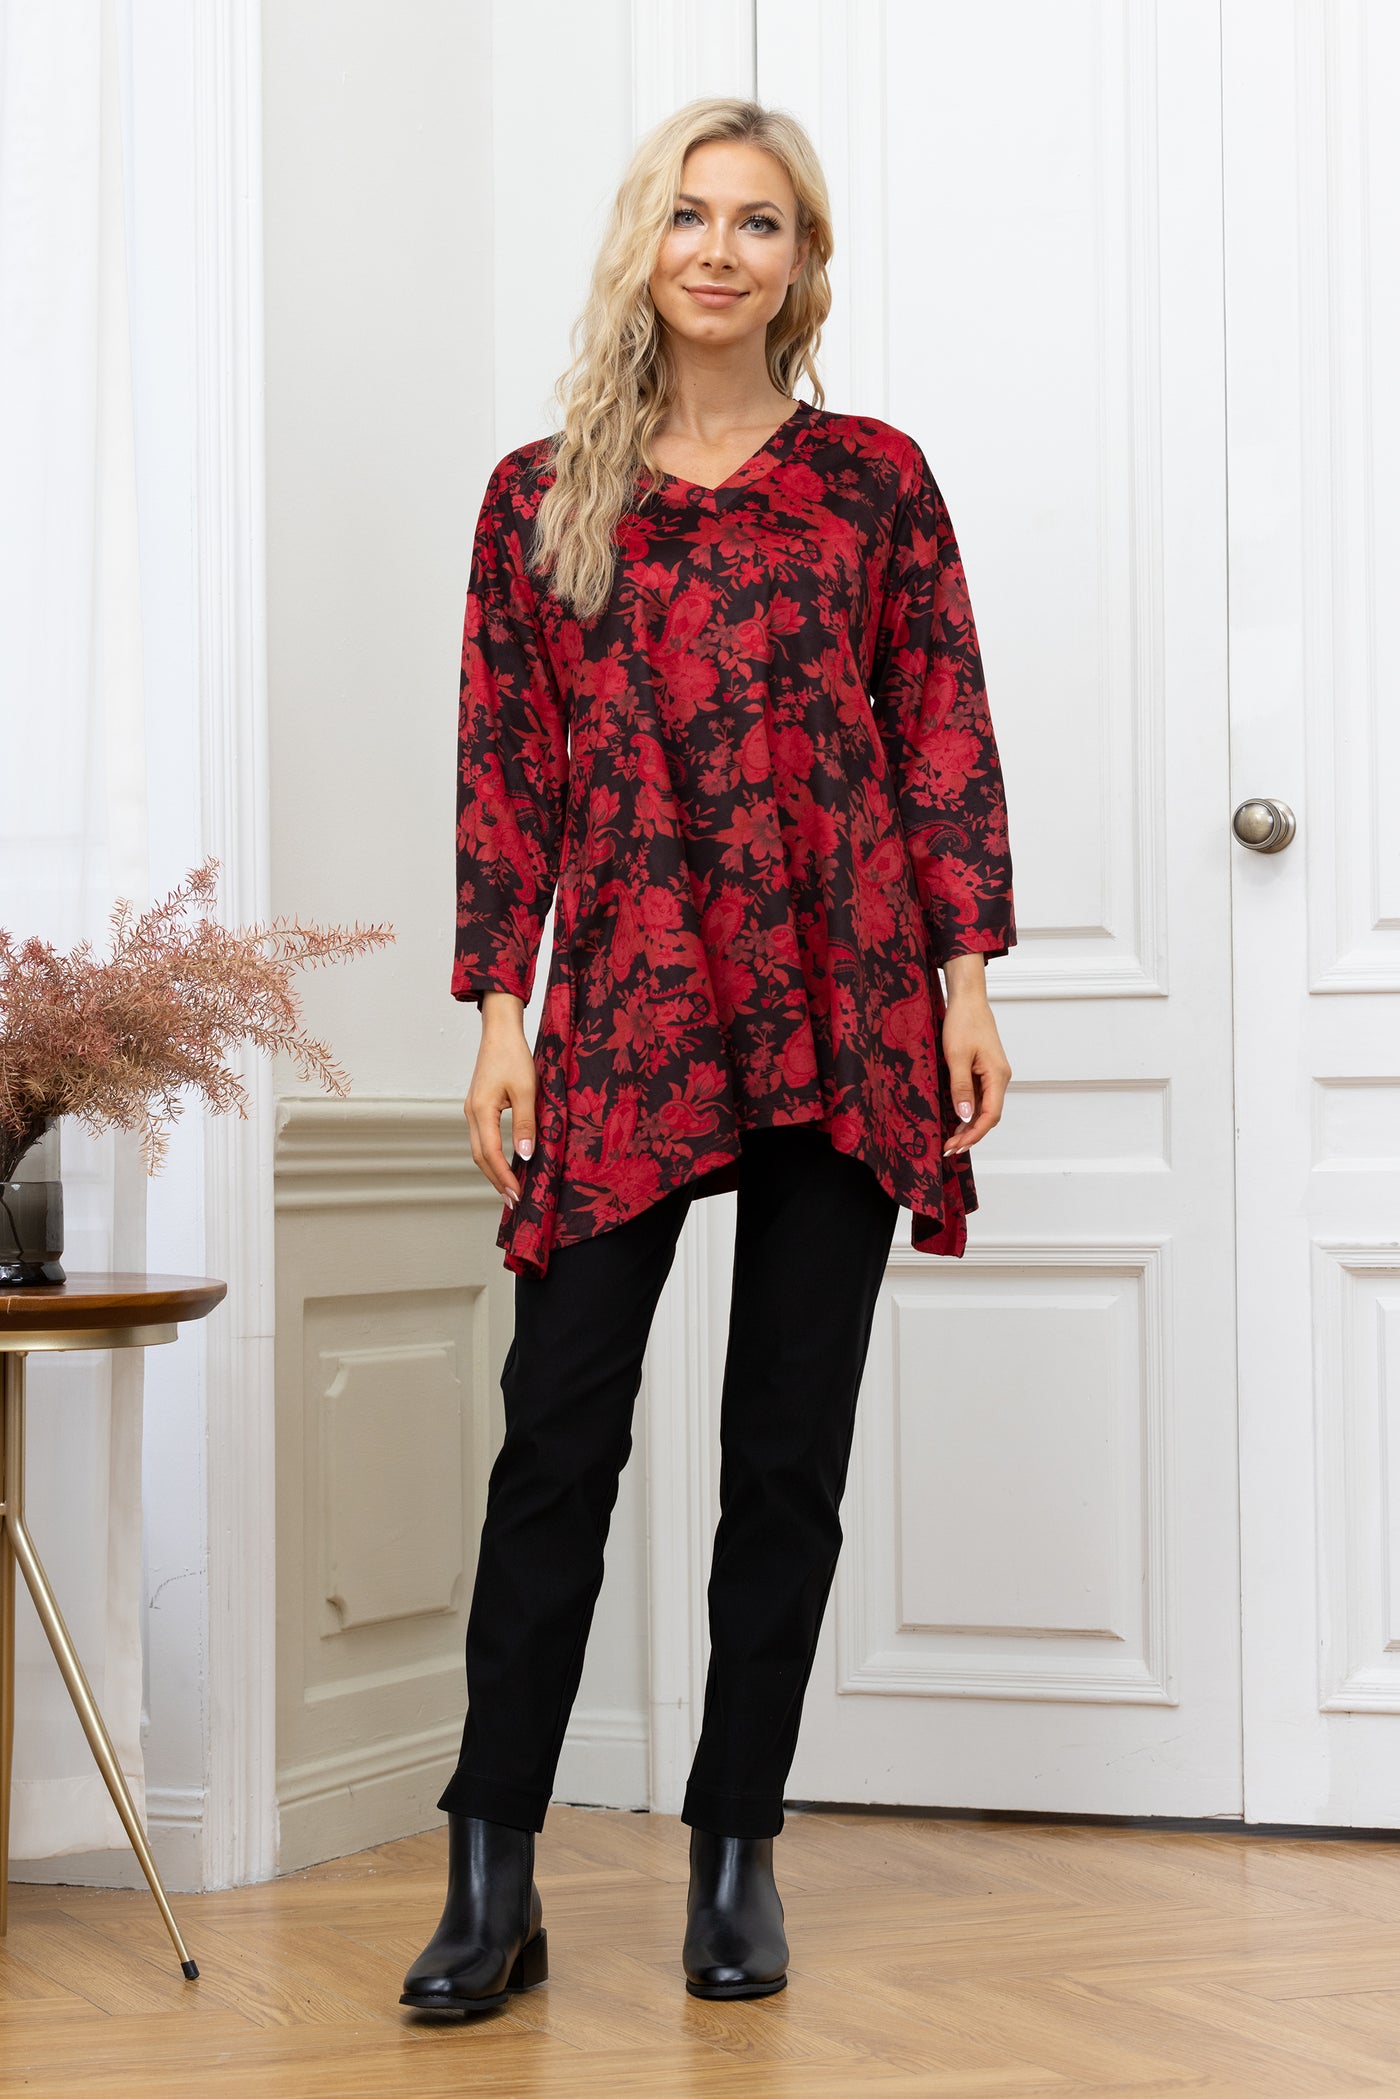 Poly Suede Printed Tunic